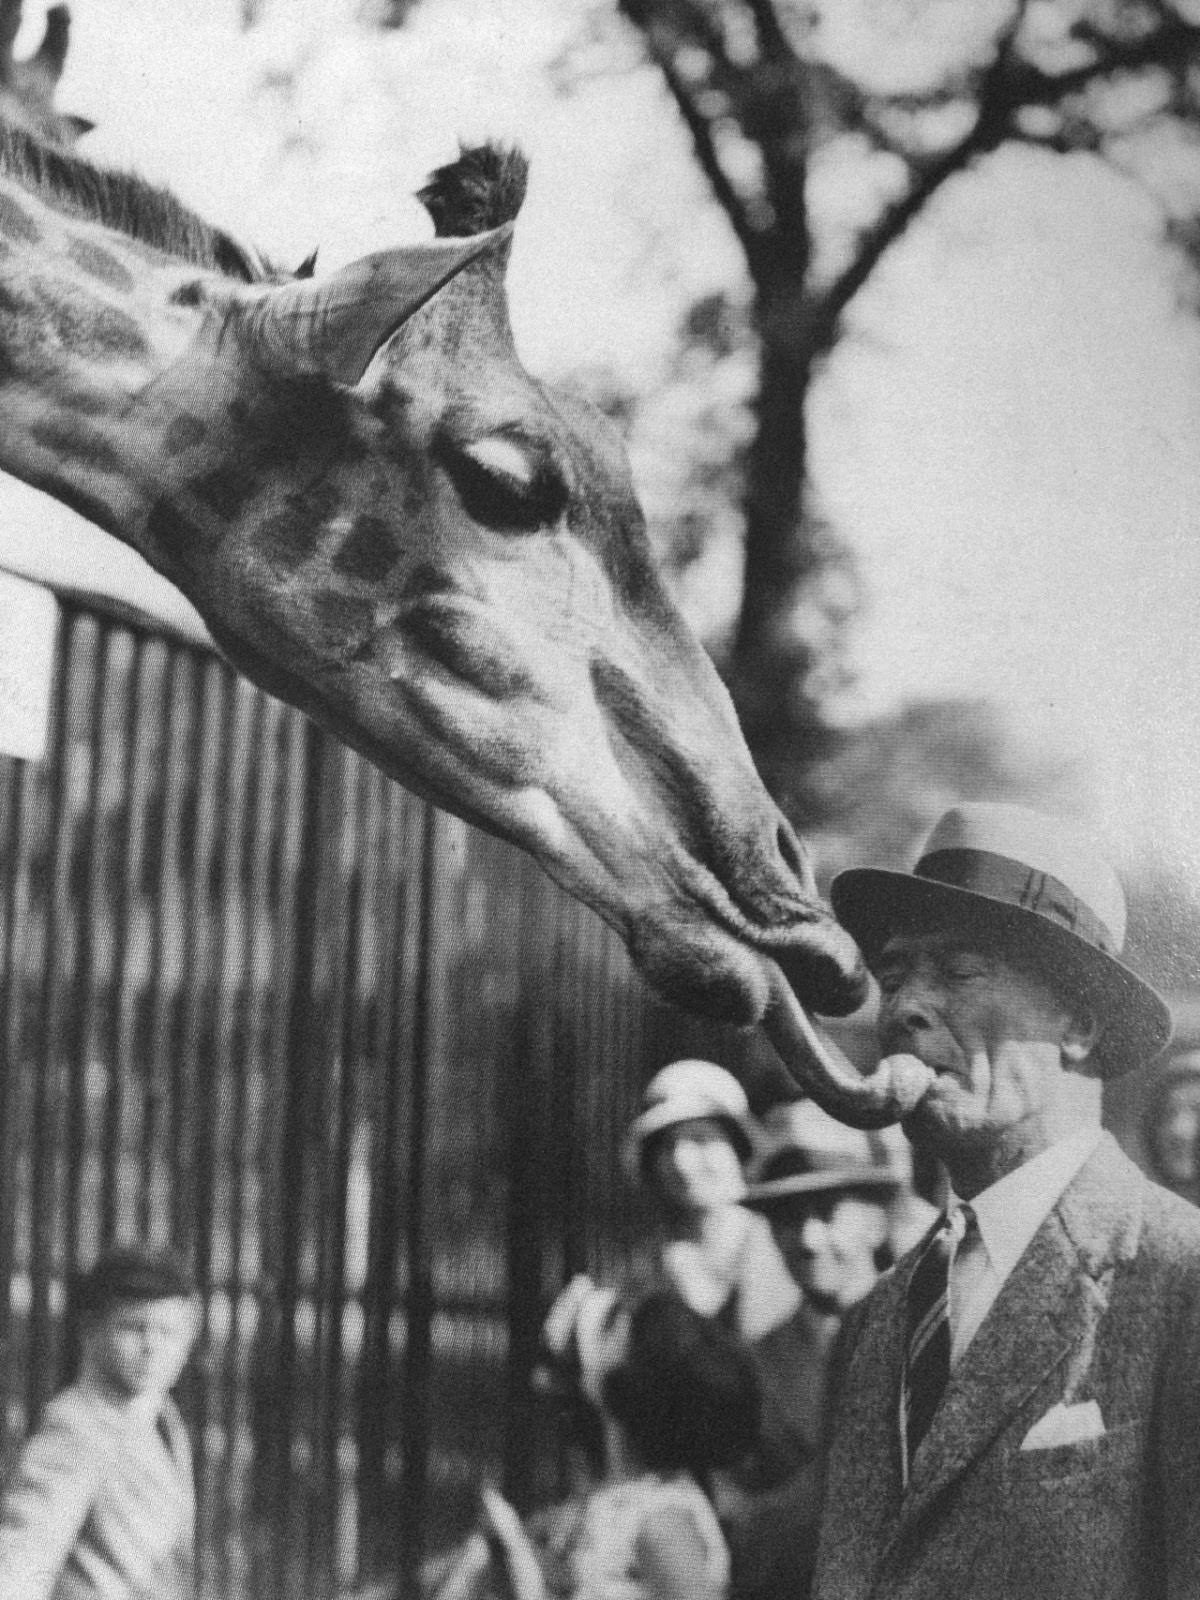 A giraffe licks a man at the London Zoo in London, England in 1931.